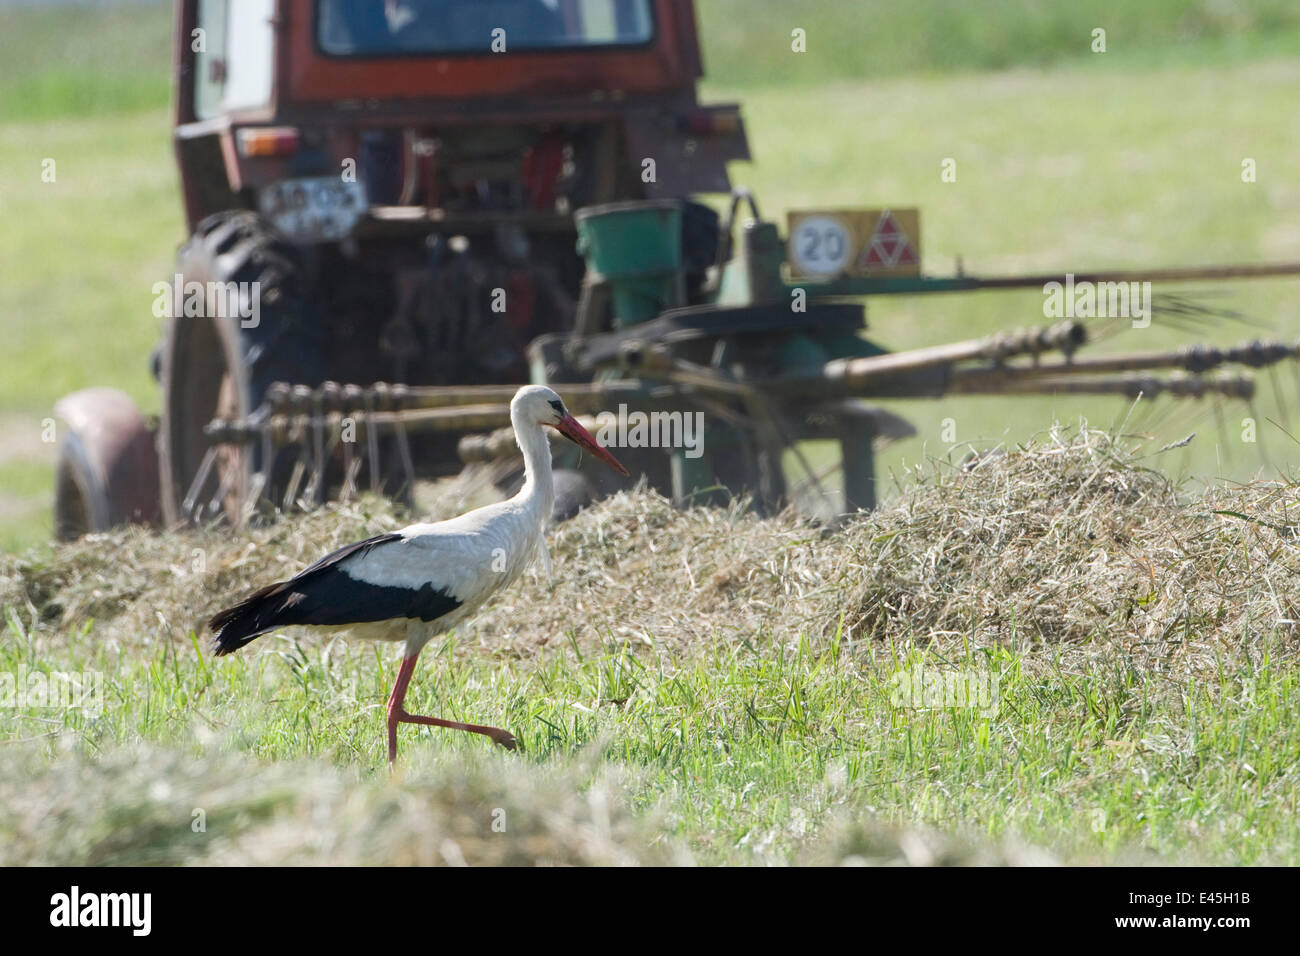 White stork (Ciconia ciconia) following tractor searching for insects amongst hay, Lithuania, June 2009 Stock Photo